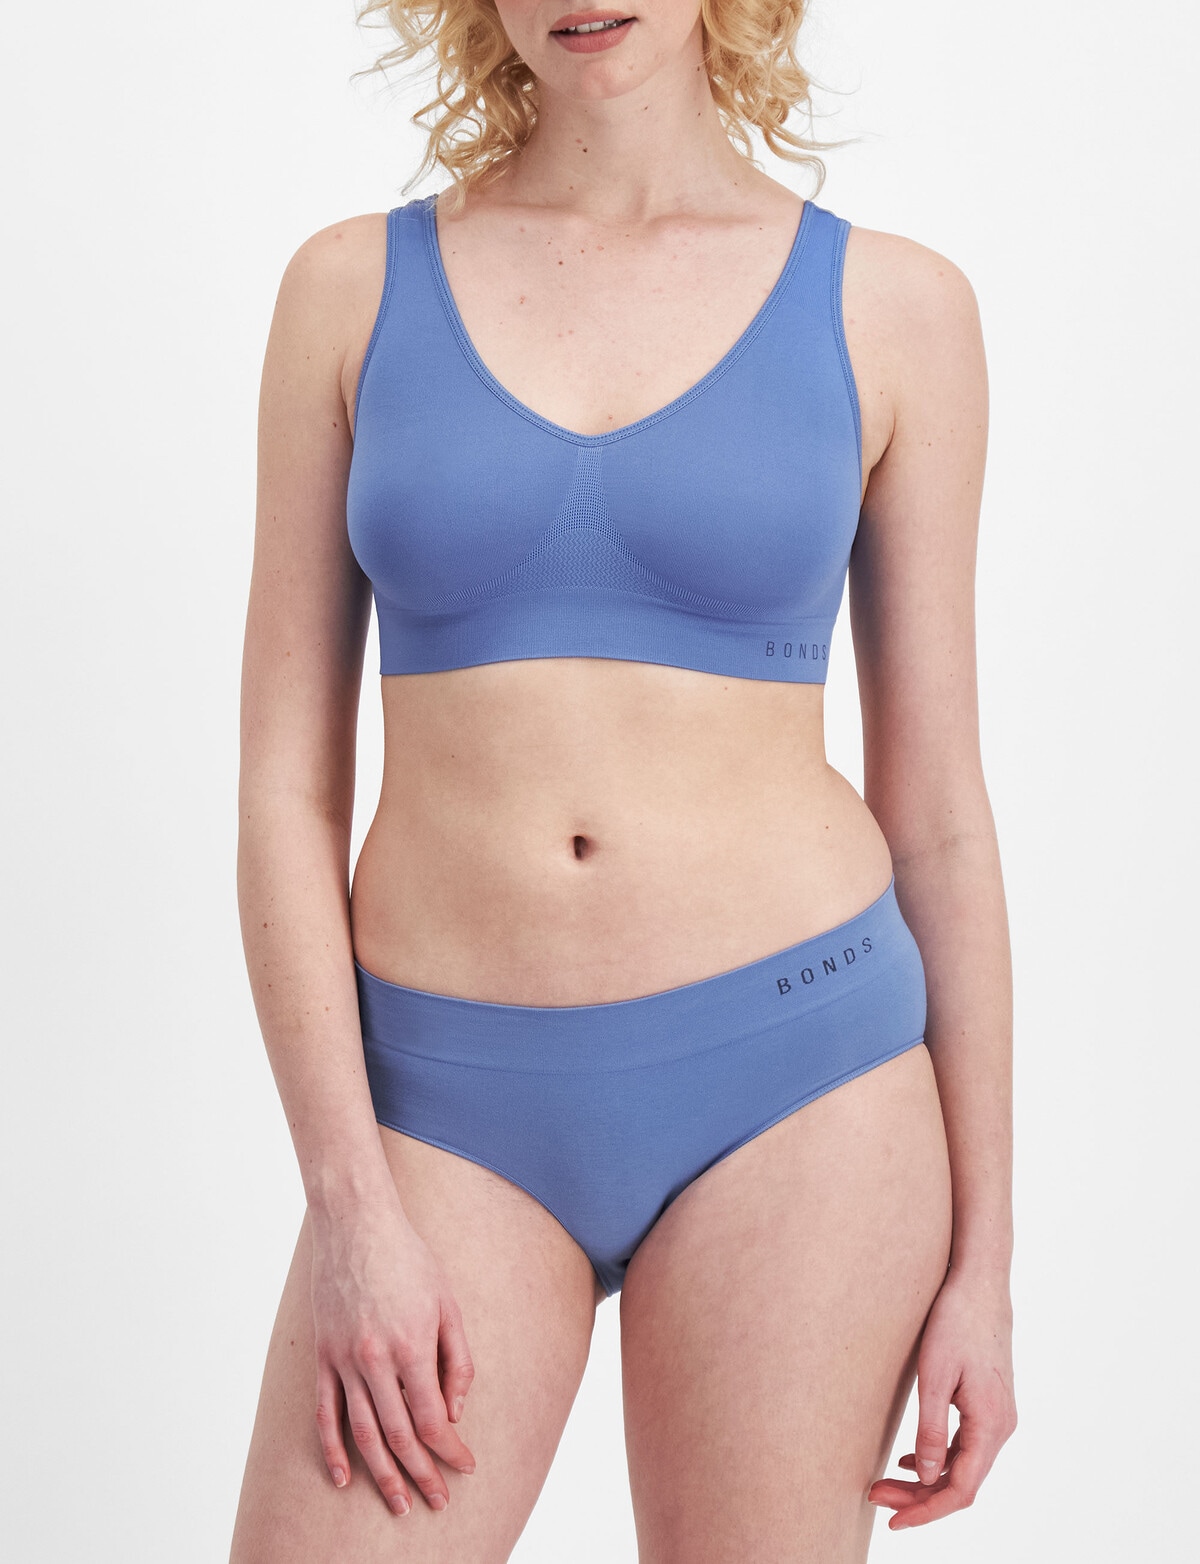 Bonds Seamless Midi Brief, Into The Blue, 8-18 - Lingerie Clearance